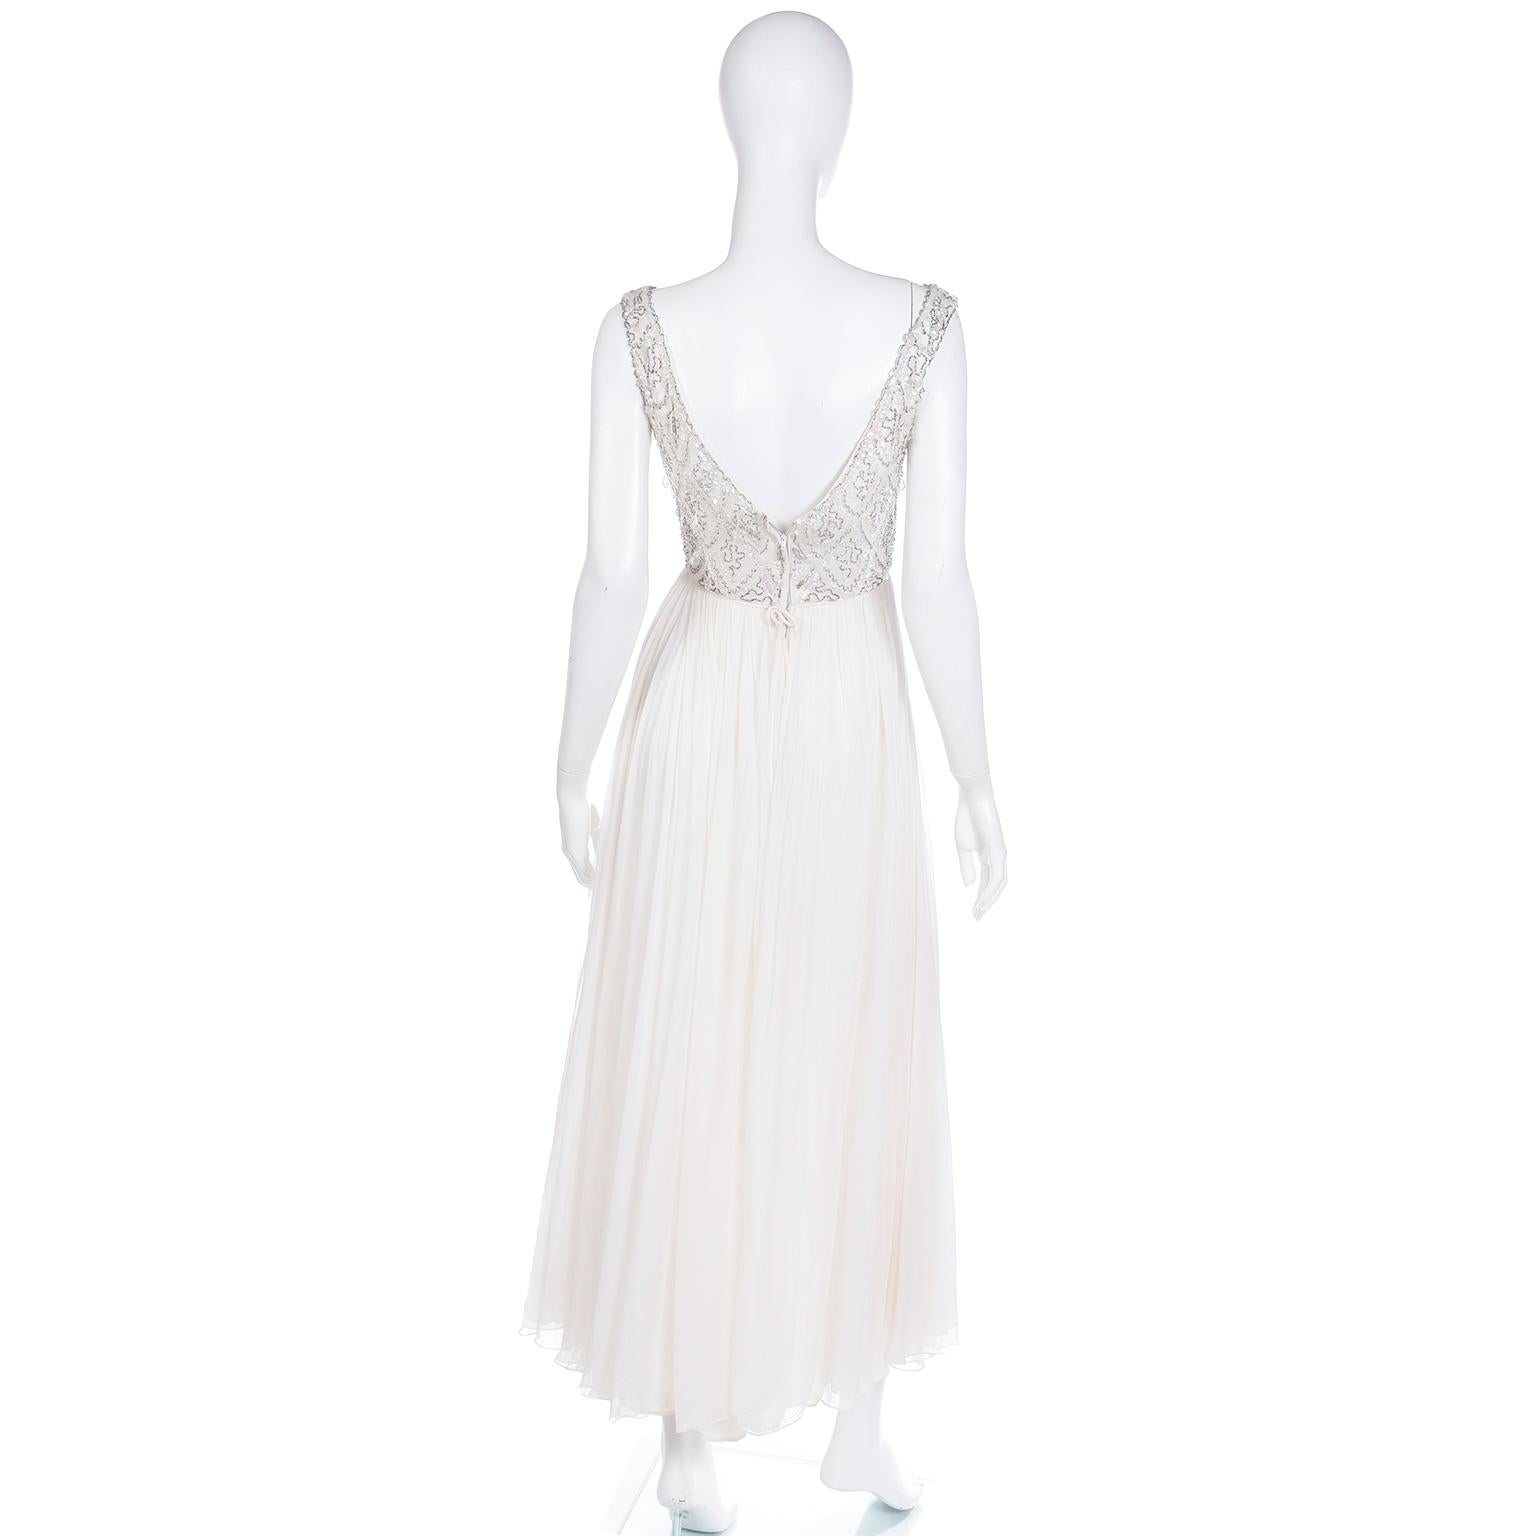 Women's 1960s White Silk Chiffon Evening Dress With Silver Beads and Iridescent Sequins For Sale